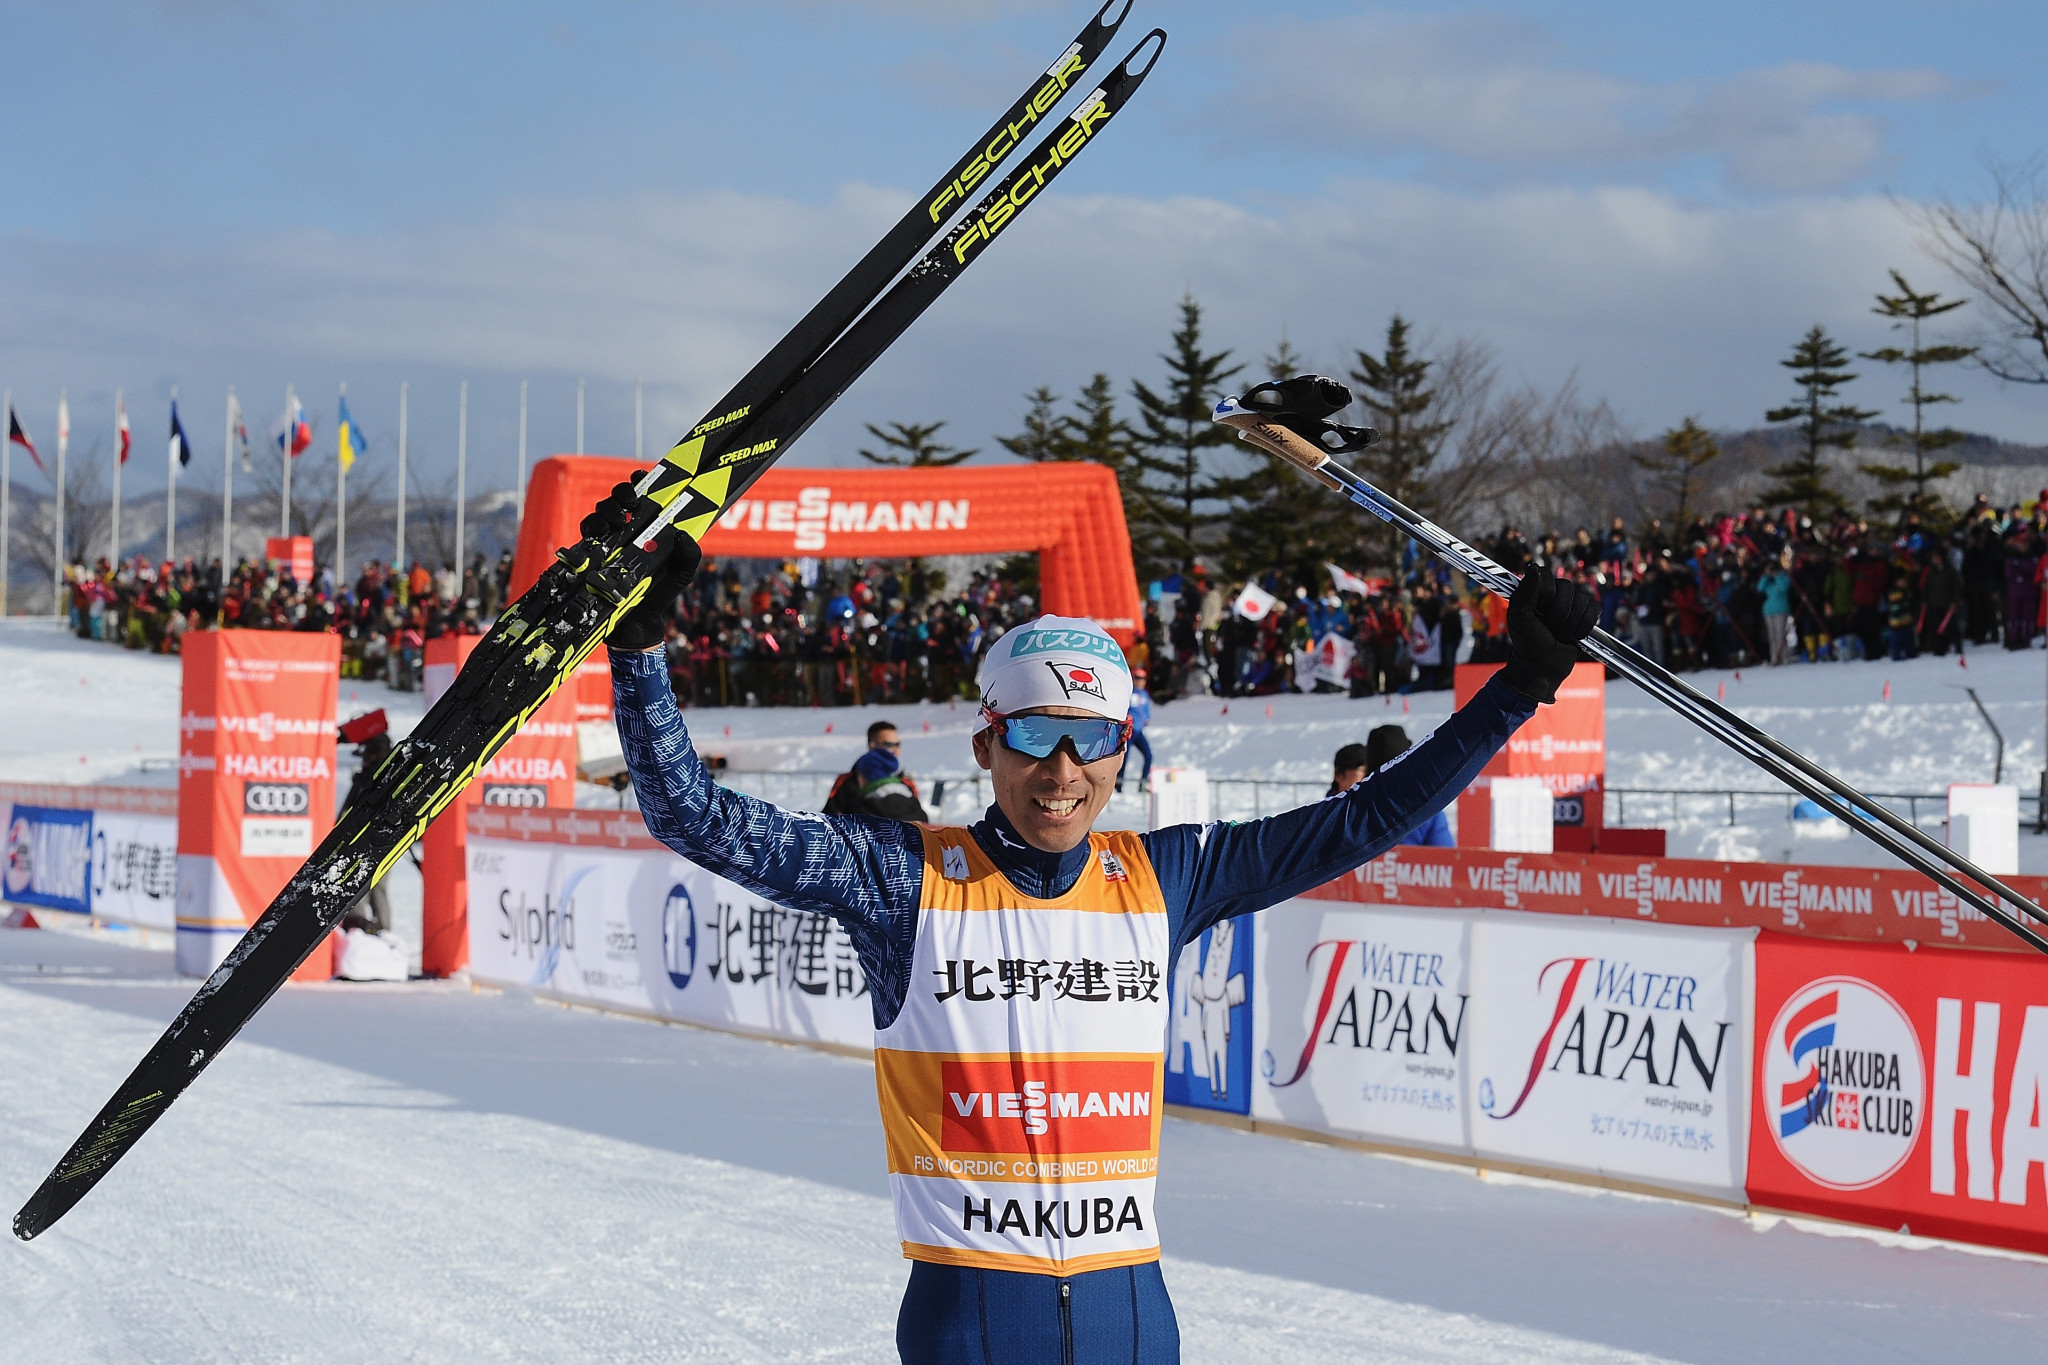 Japan's Watabe claims home victory at FIS Nordic Combined World Cup in Hakuba